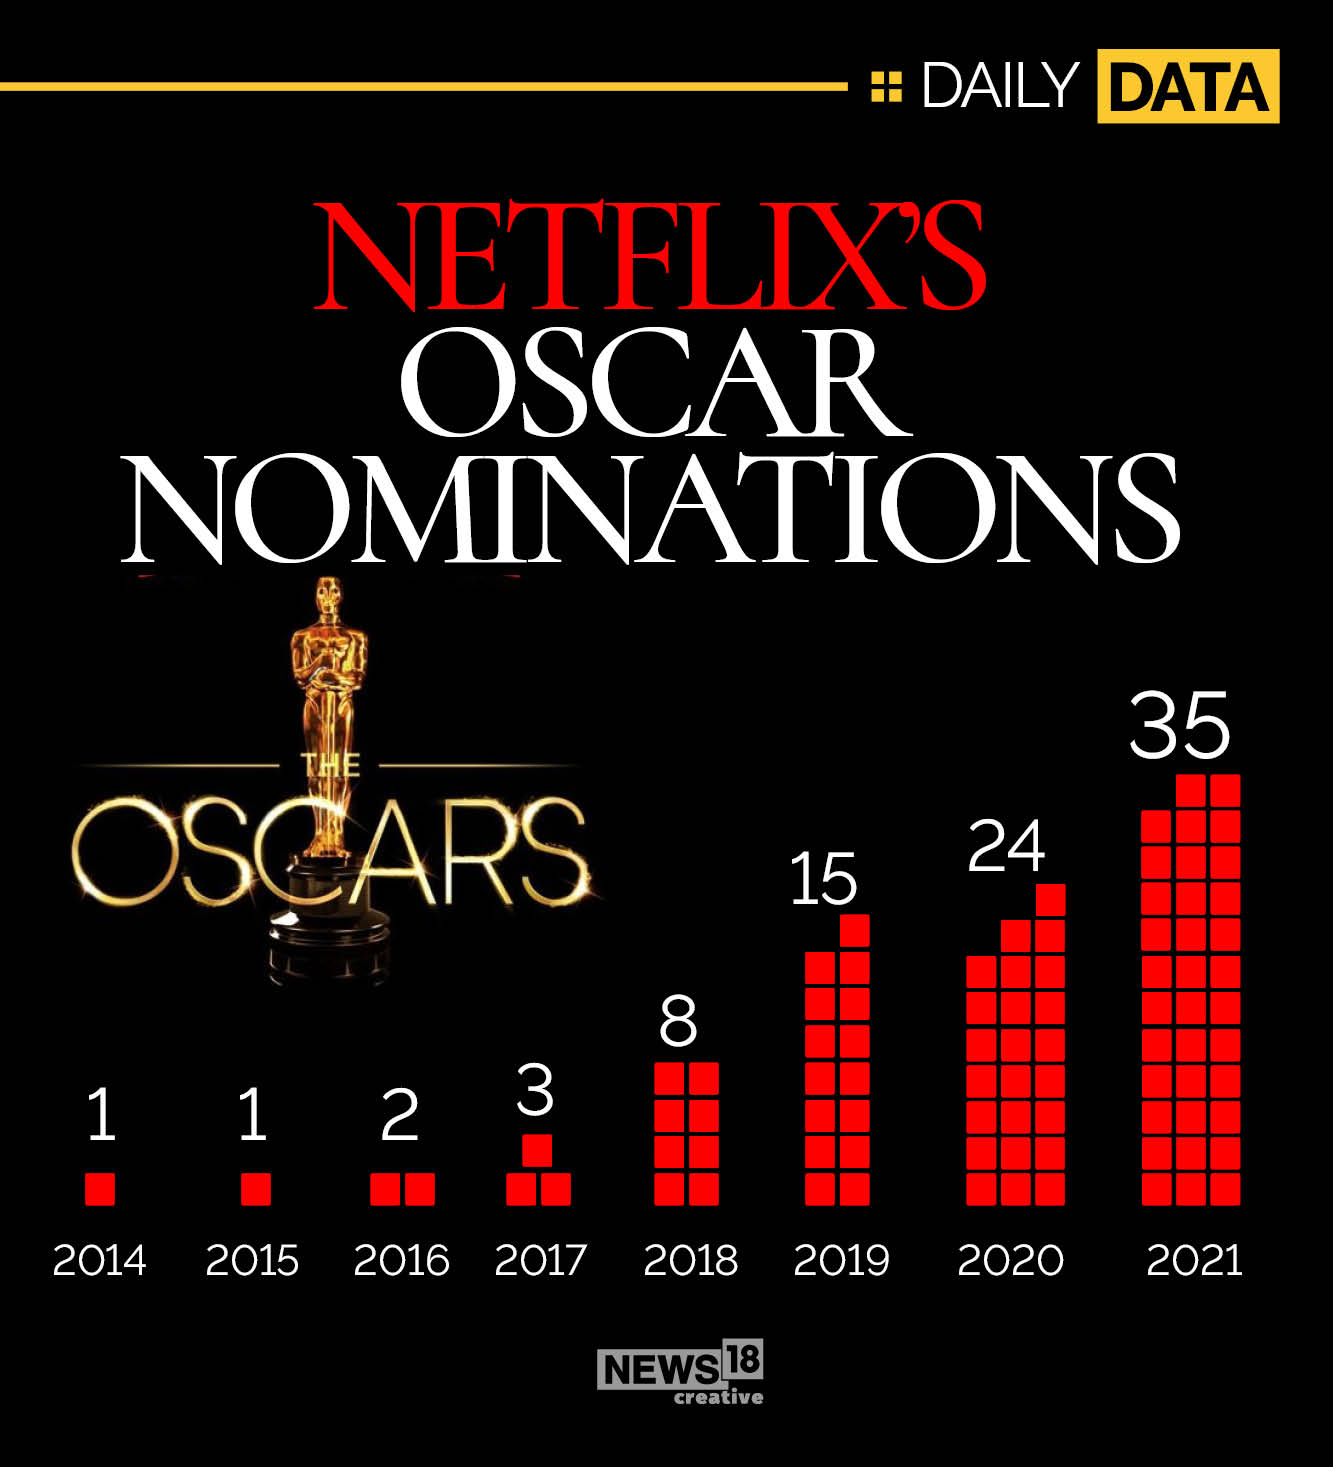 How Netflix went from one Oscar nomination in 2014 to 35 this year